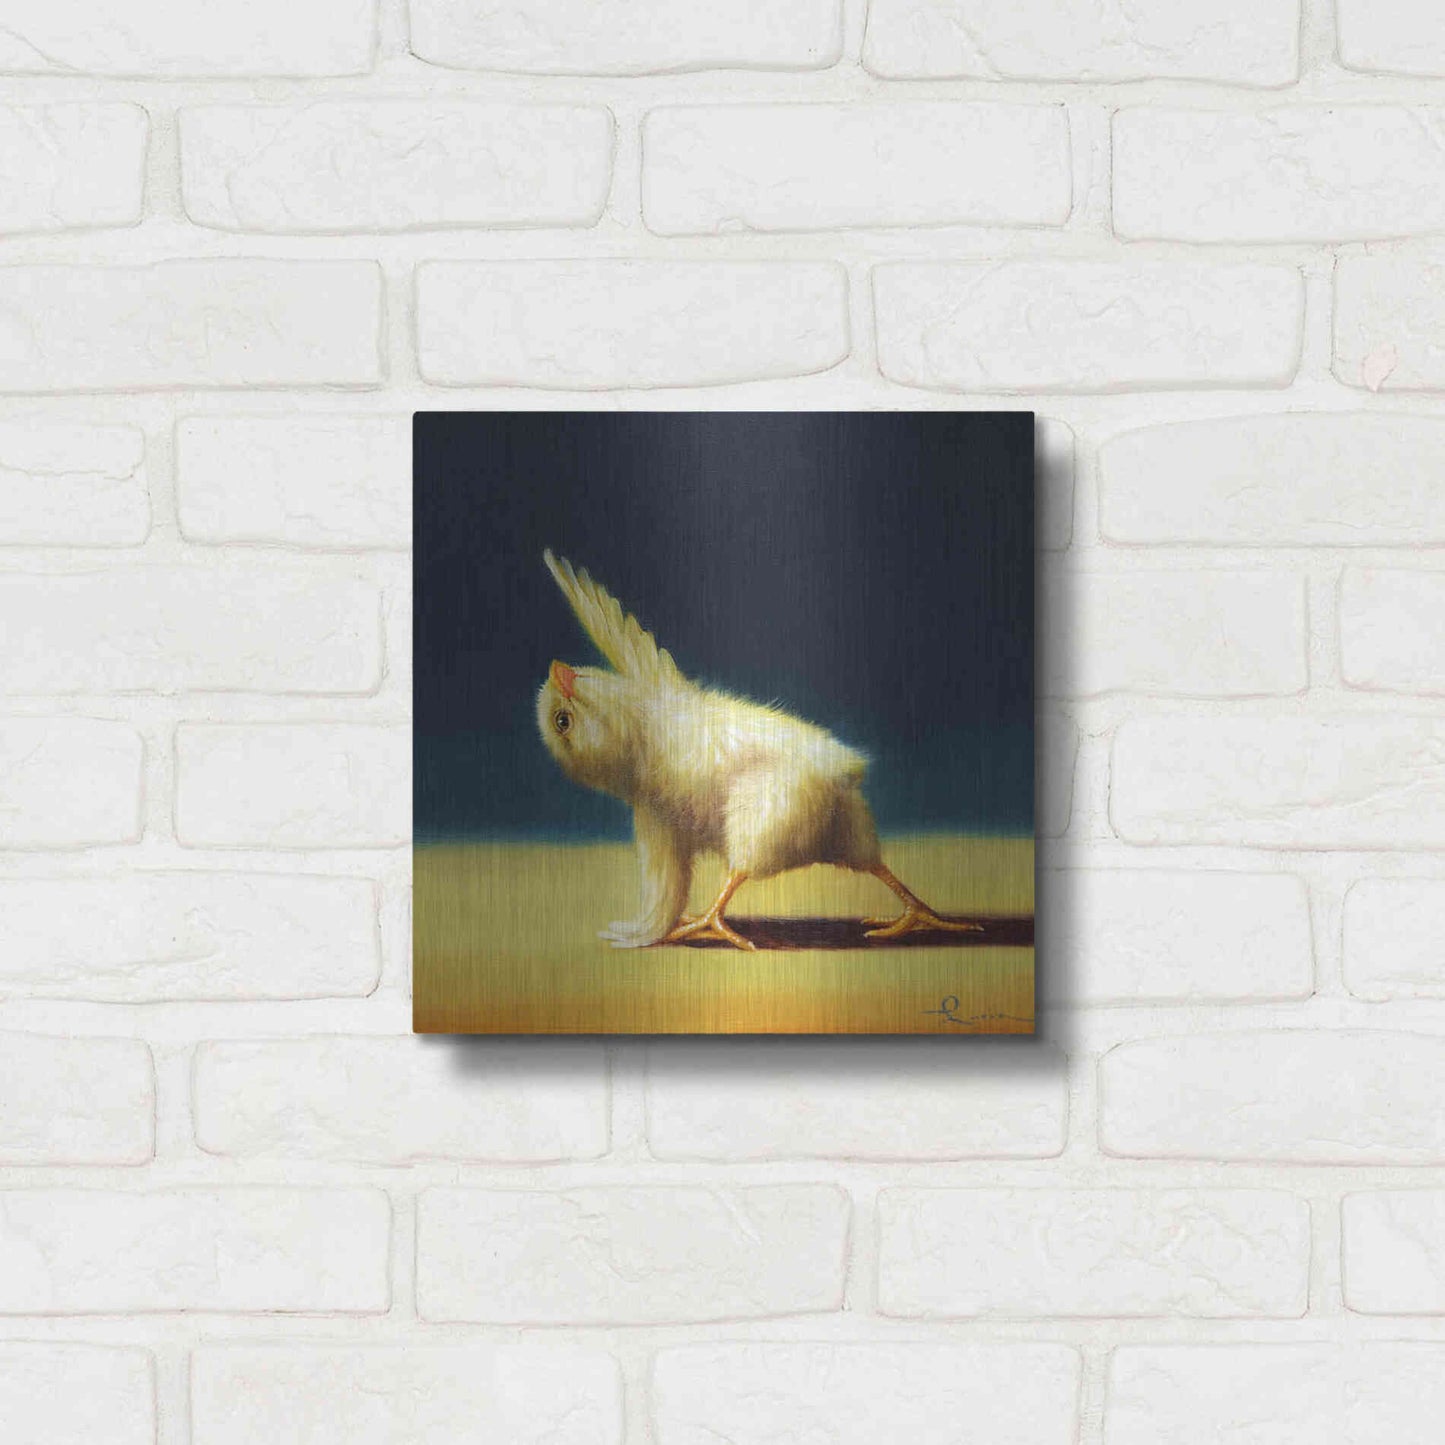 Luxe Metal Art 'Yoga Chick Revolved Side Angle' by Lucia Heffernan,12x12